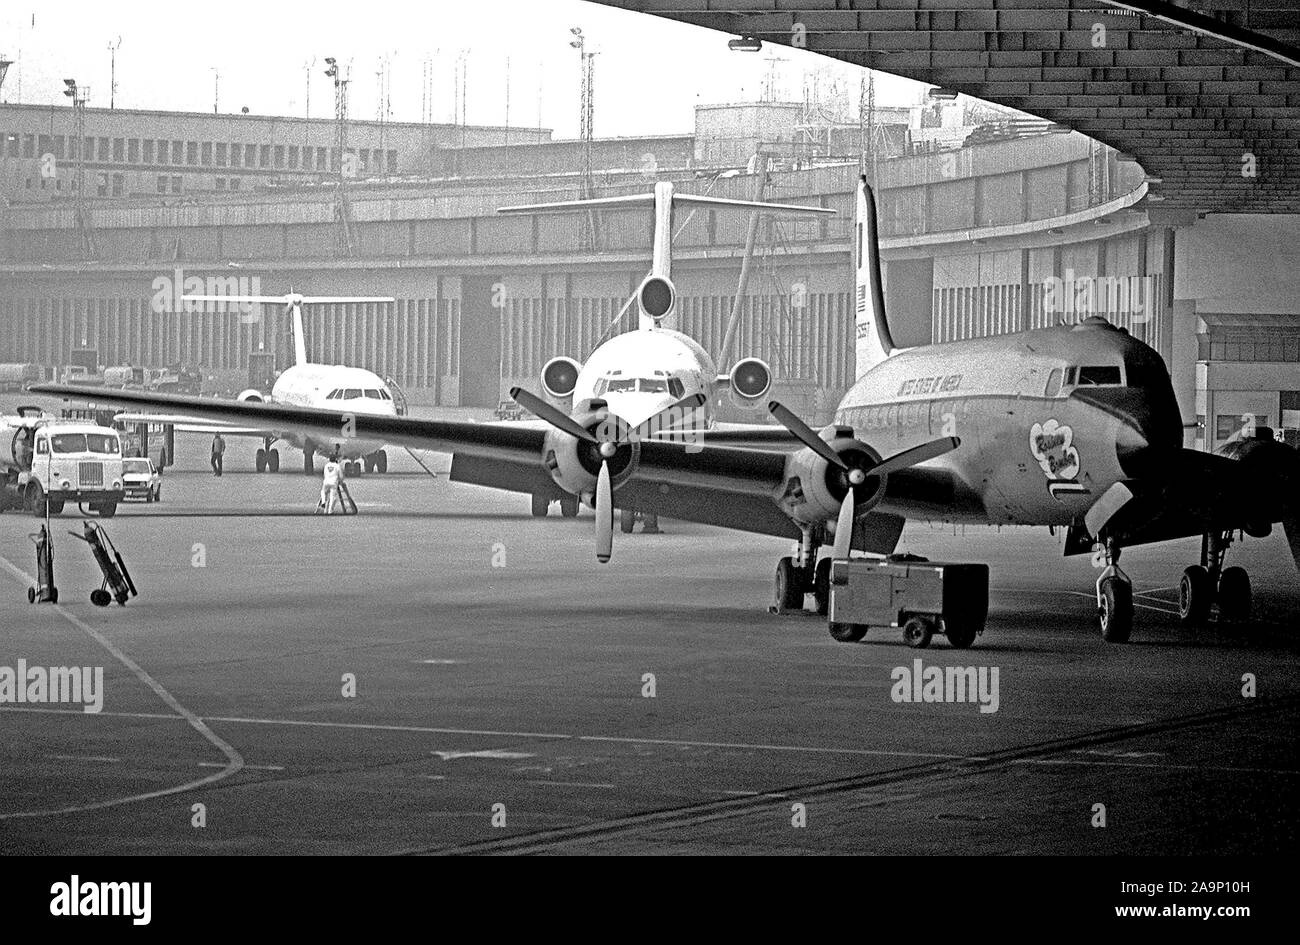 Civilian airlines are authorized to land at the Tempelhof Central Airport when bad weather prevents them from landing at the primary airport at Tegel.  The Rosinen Bomber is the first plane from the right. Stock Photo